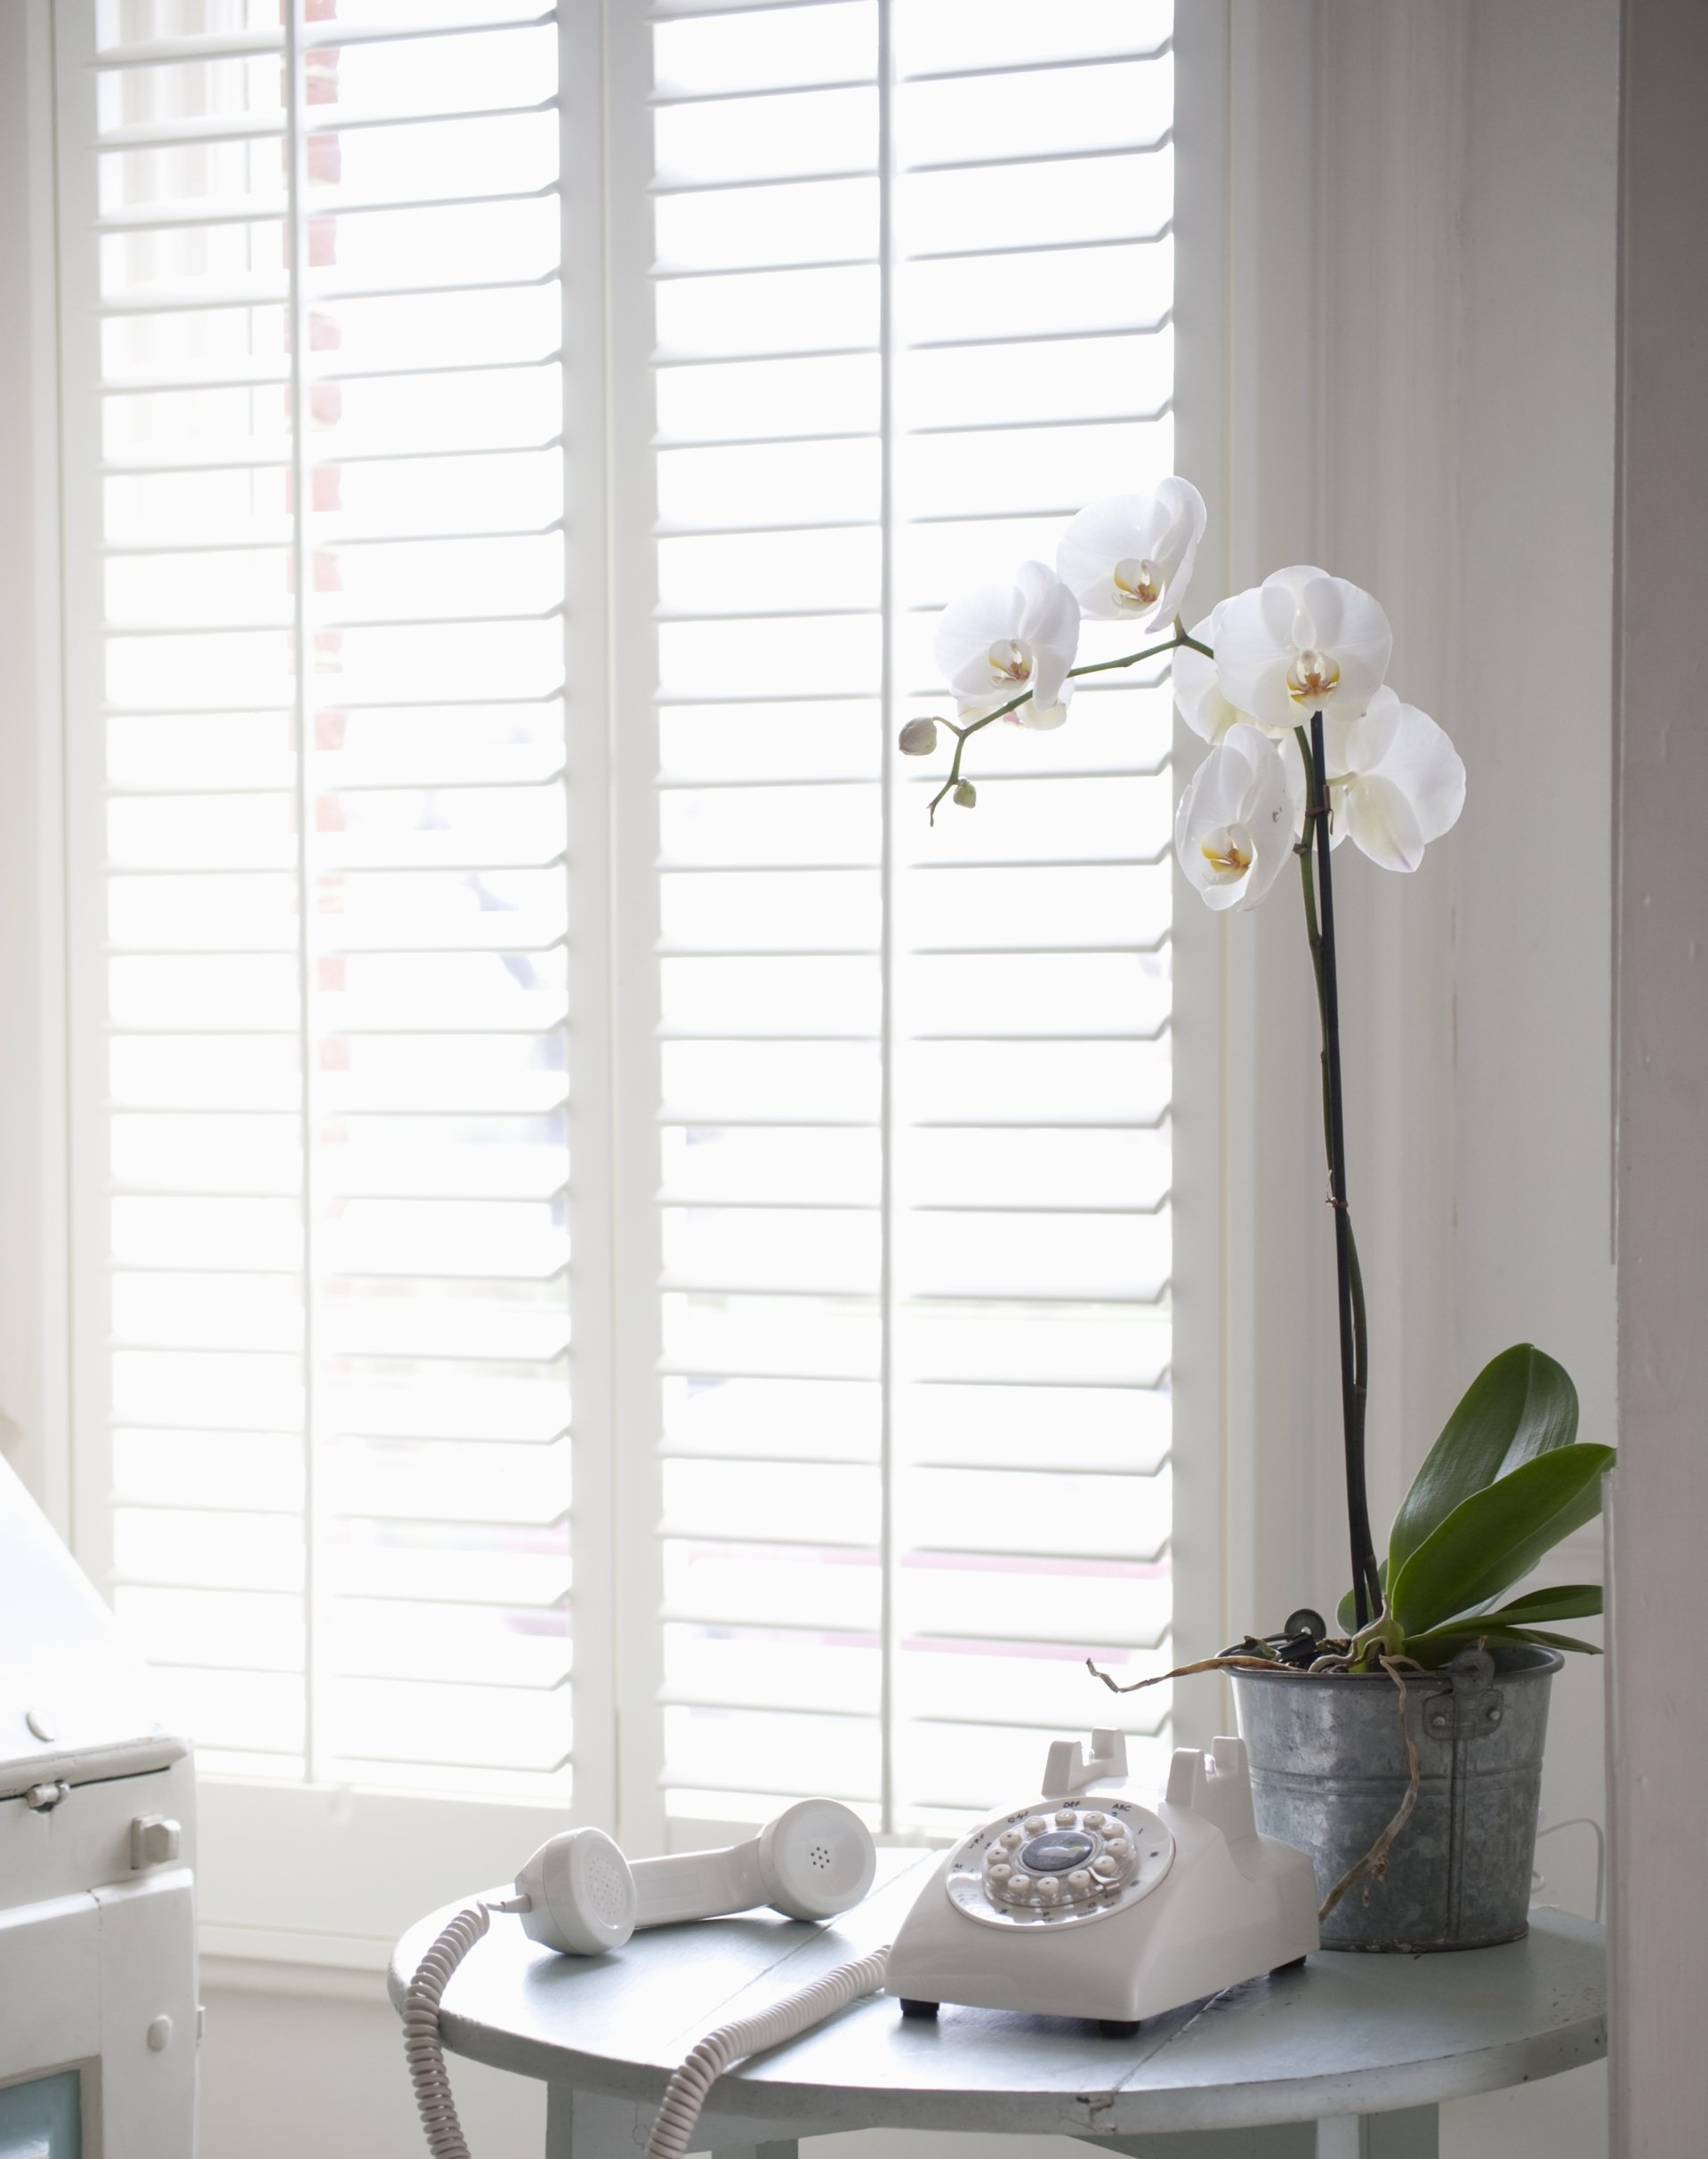 Window with open white Plantation Shutters, in front of small table with telephone off the hook and white flower in metal pot.